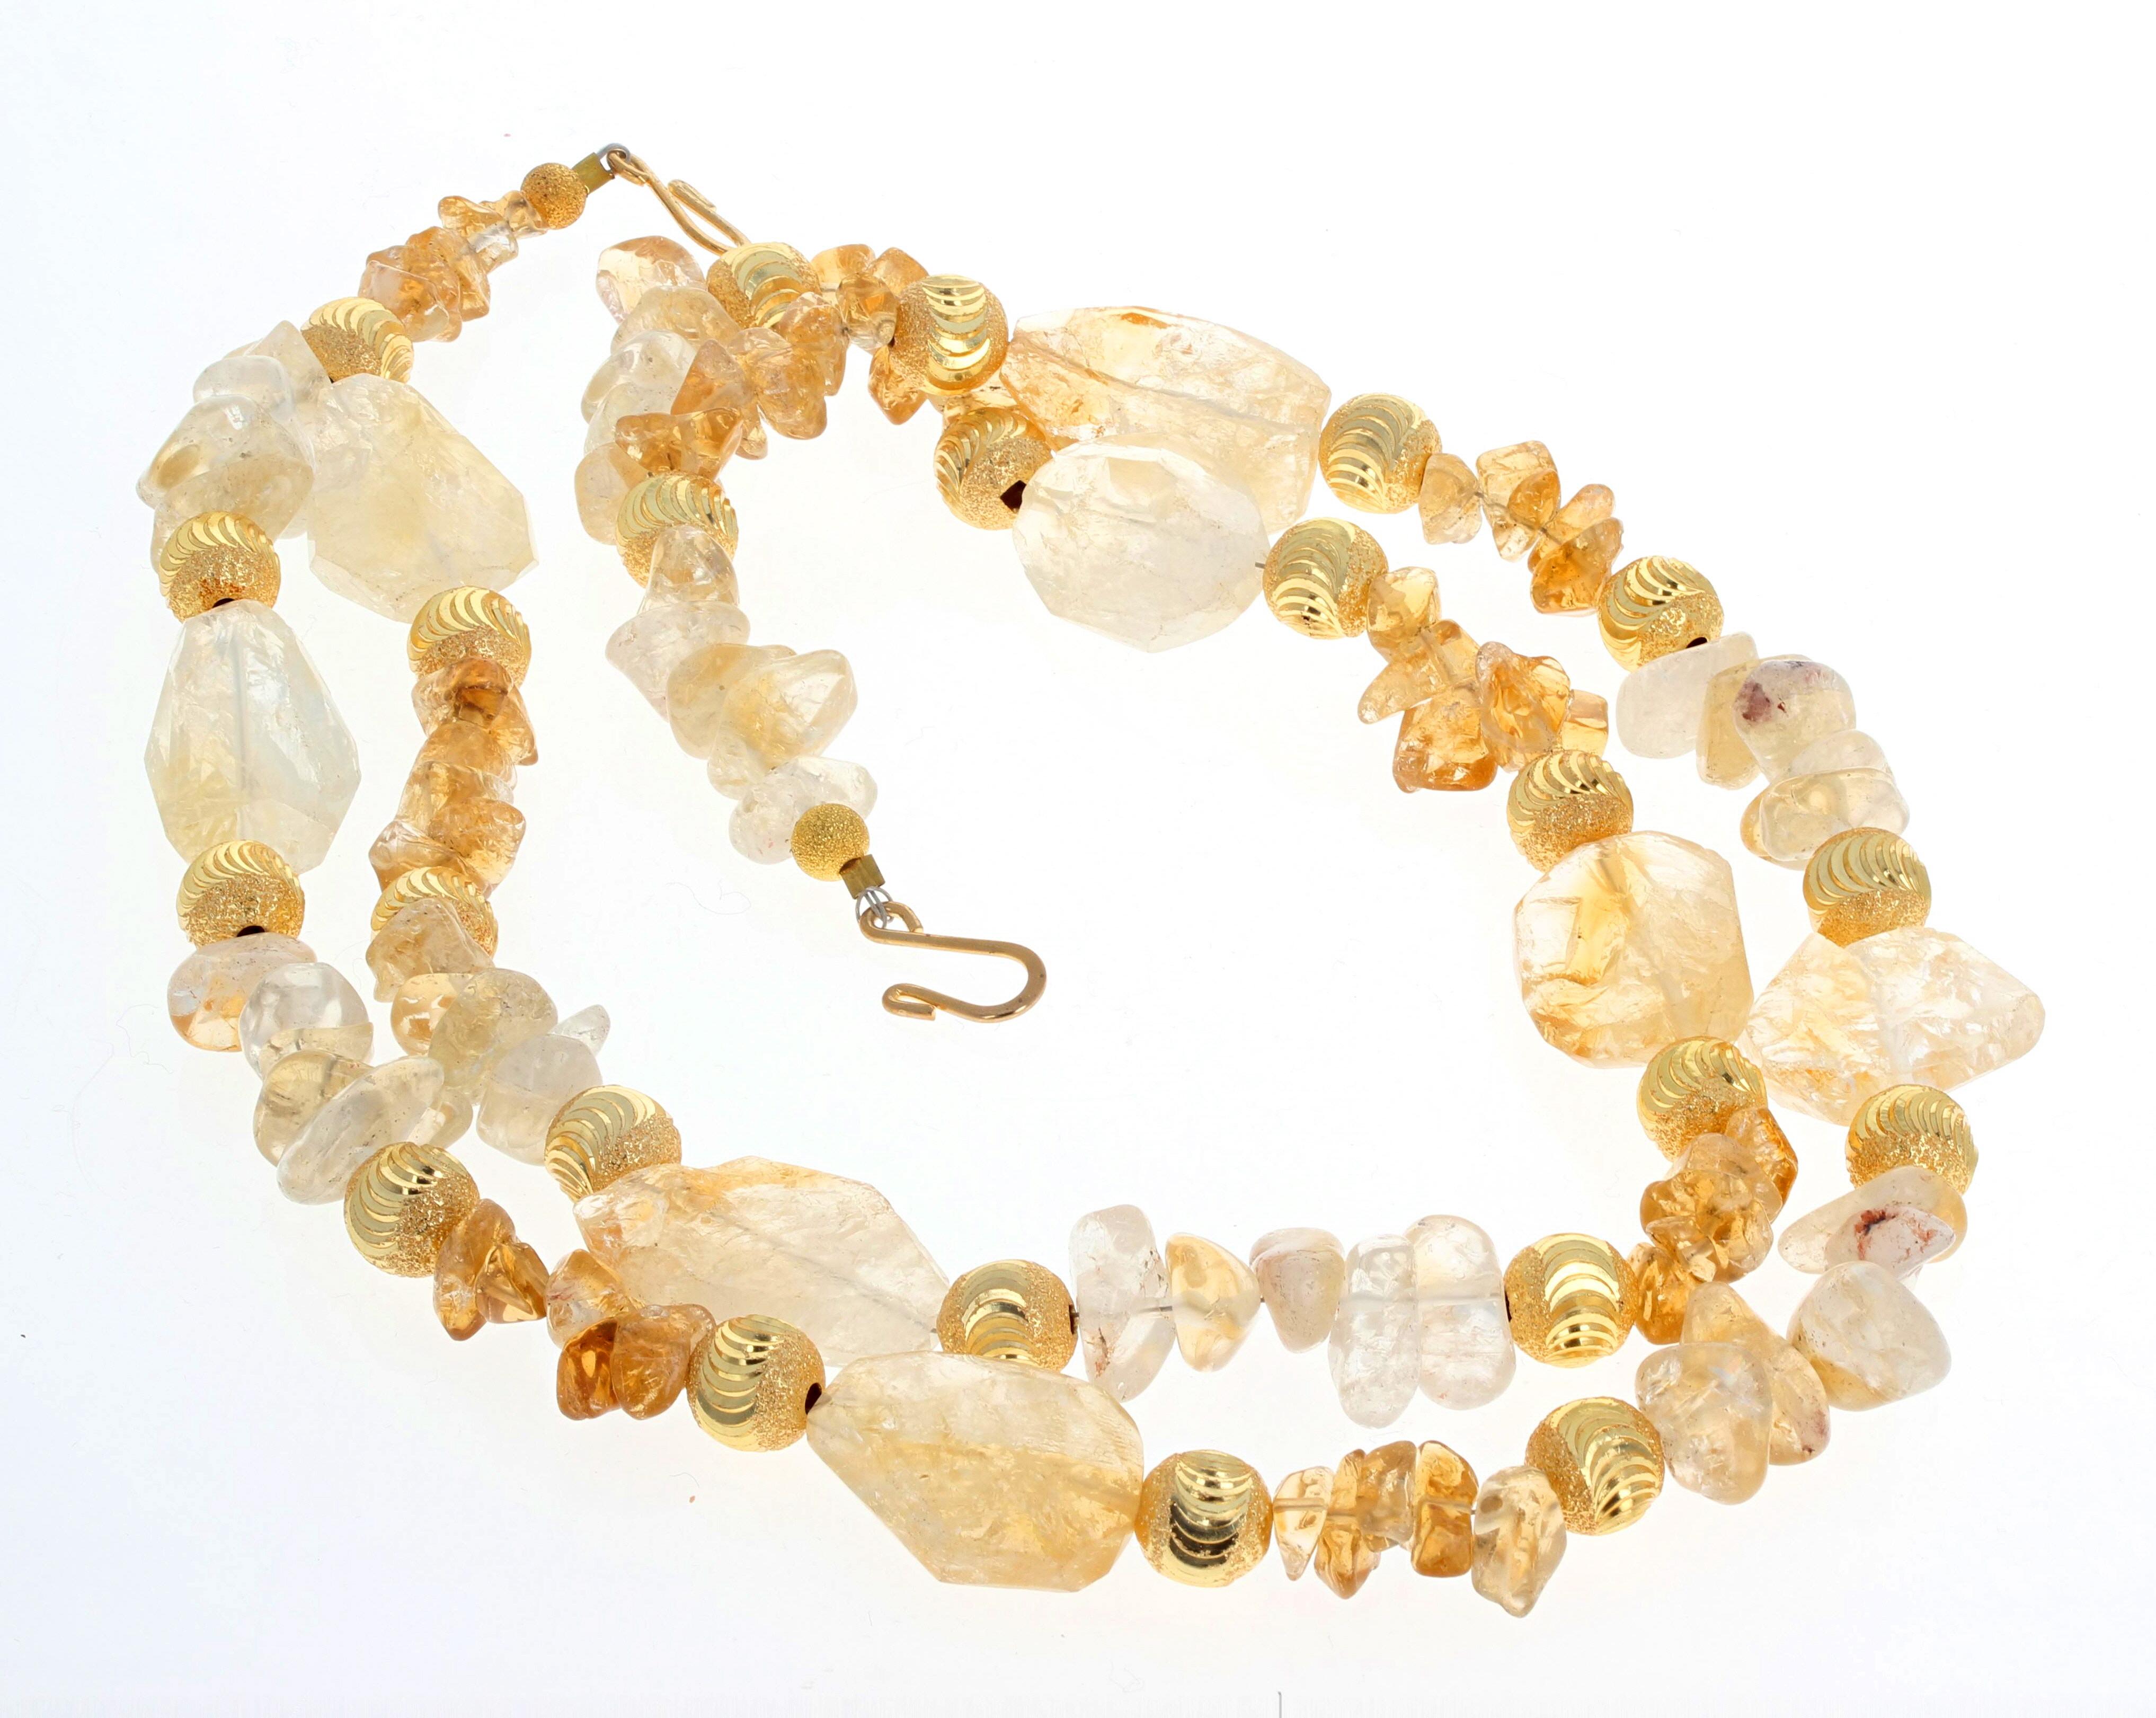 AJD Highly polished beautiful large natural Citrine gemstones in this 18 inch long necklace are enhanced by the large 10mm round gold plated rondels.  The largest of the Citrines are approximately 25mm x 17mm.  The clasp is a gold plated easy to use